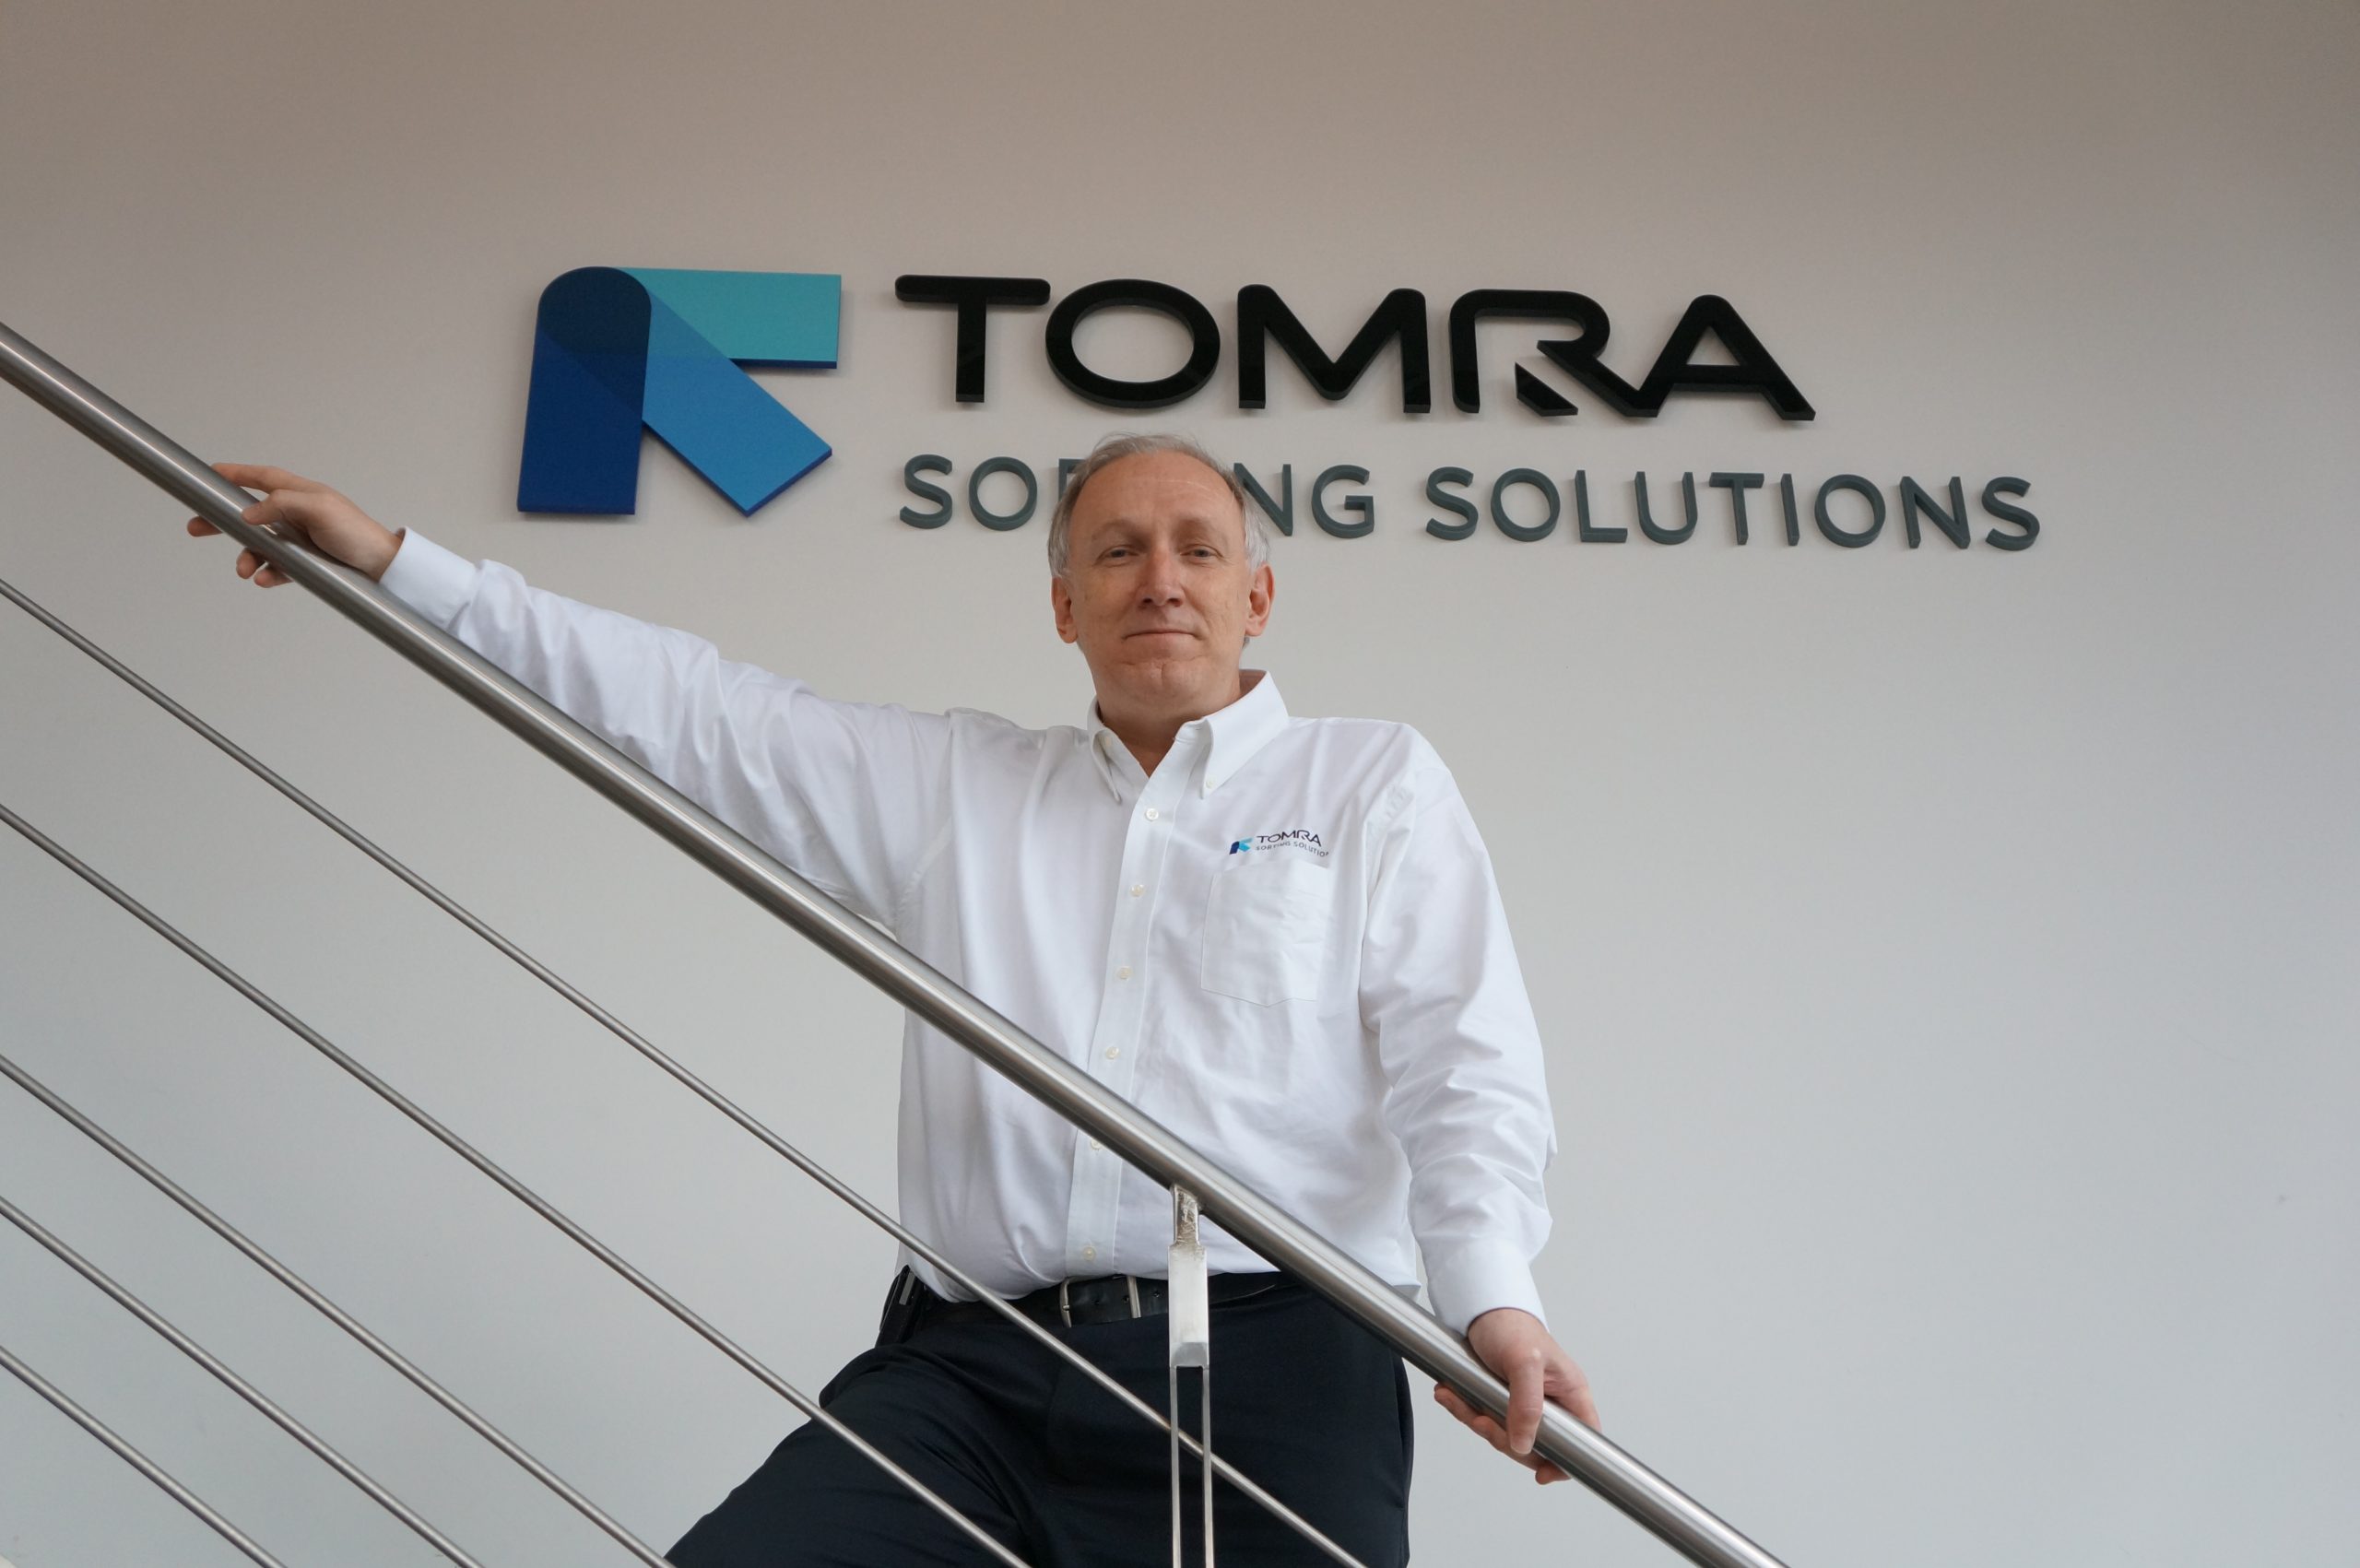 TOMRA Sorting Food, formerly BEST and ODENBERG, designs and manufactures sensor-based sorting machines for the food industry. Over 9,000 systems are installed at food growers, packers and processors worldwide.